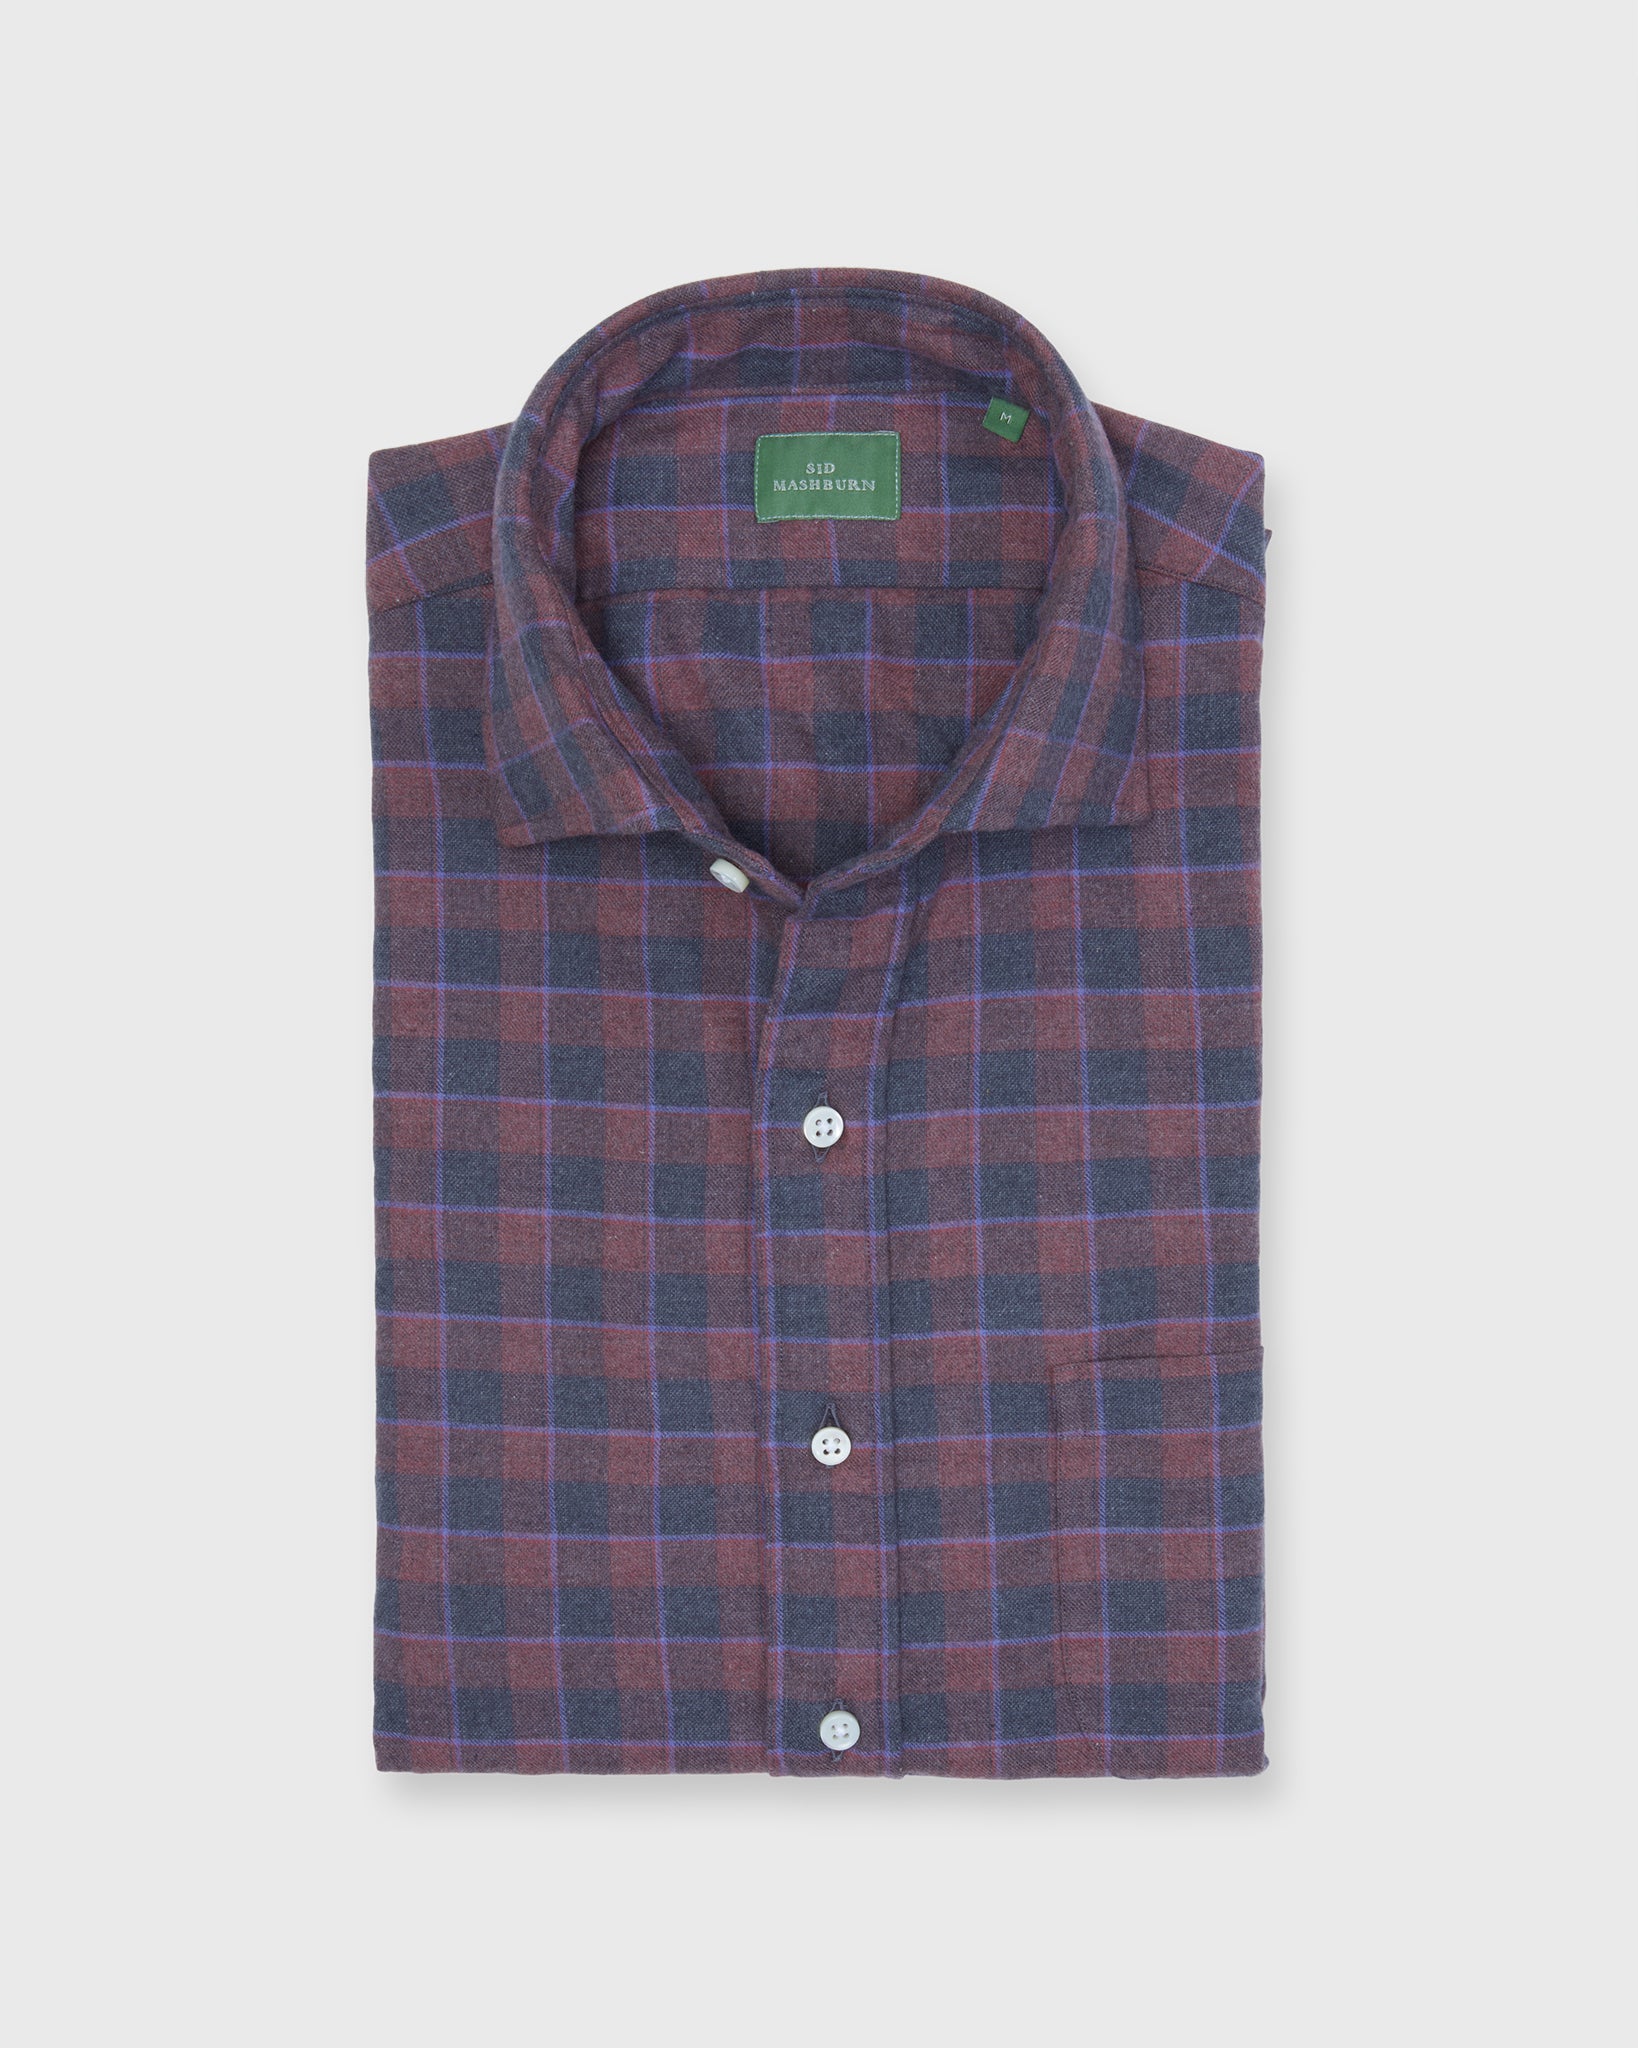 Spread Collar Sport Shirt in Brick/Charcoal/Lavender Plaid Brushed Twill